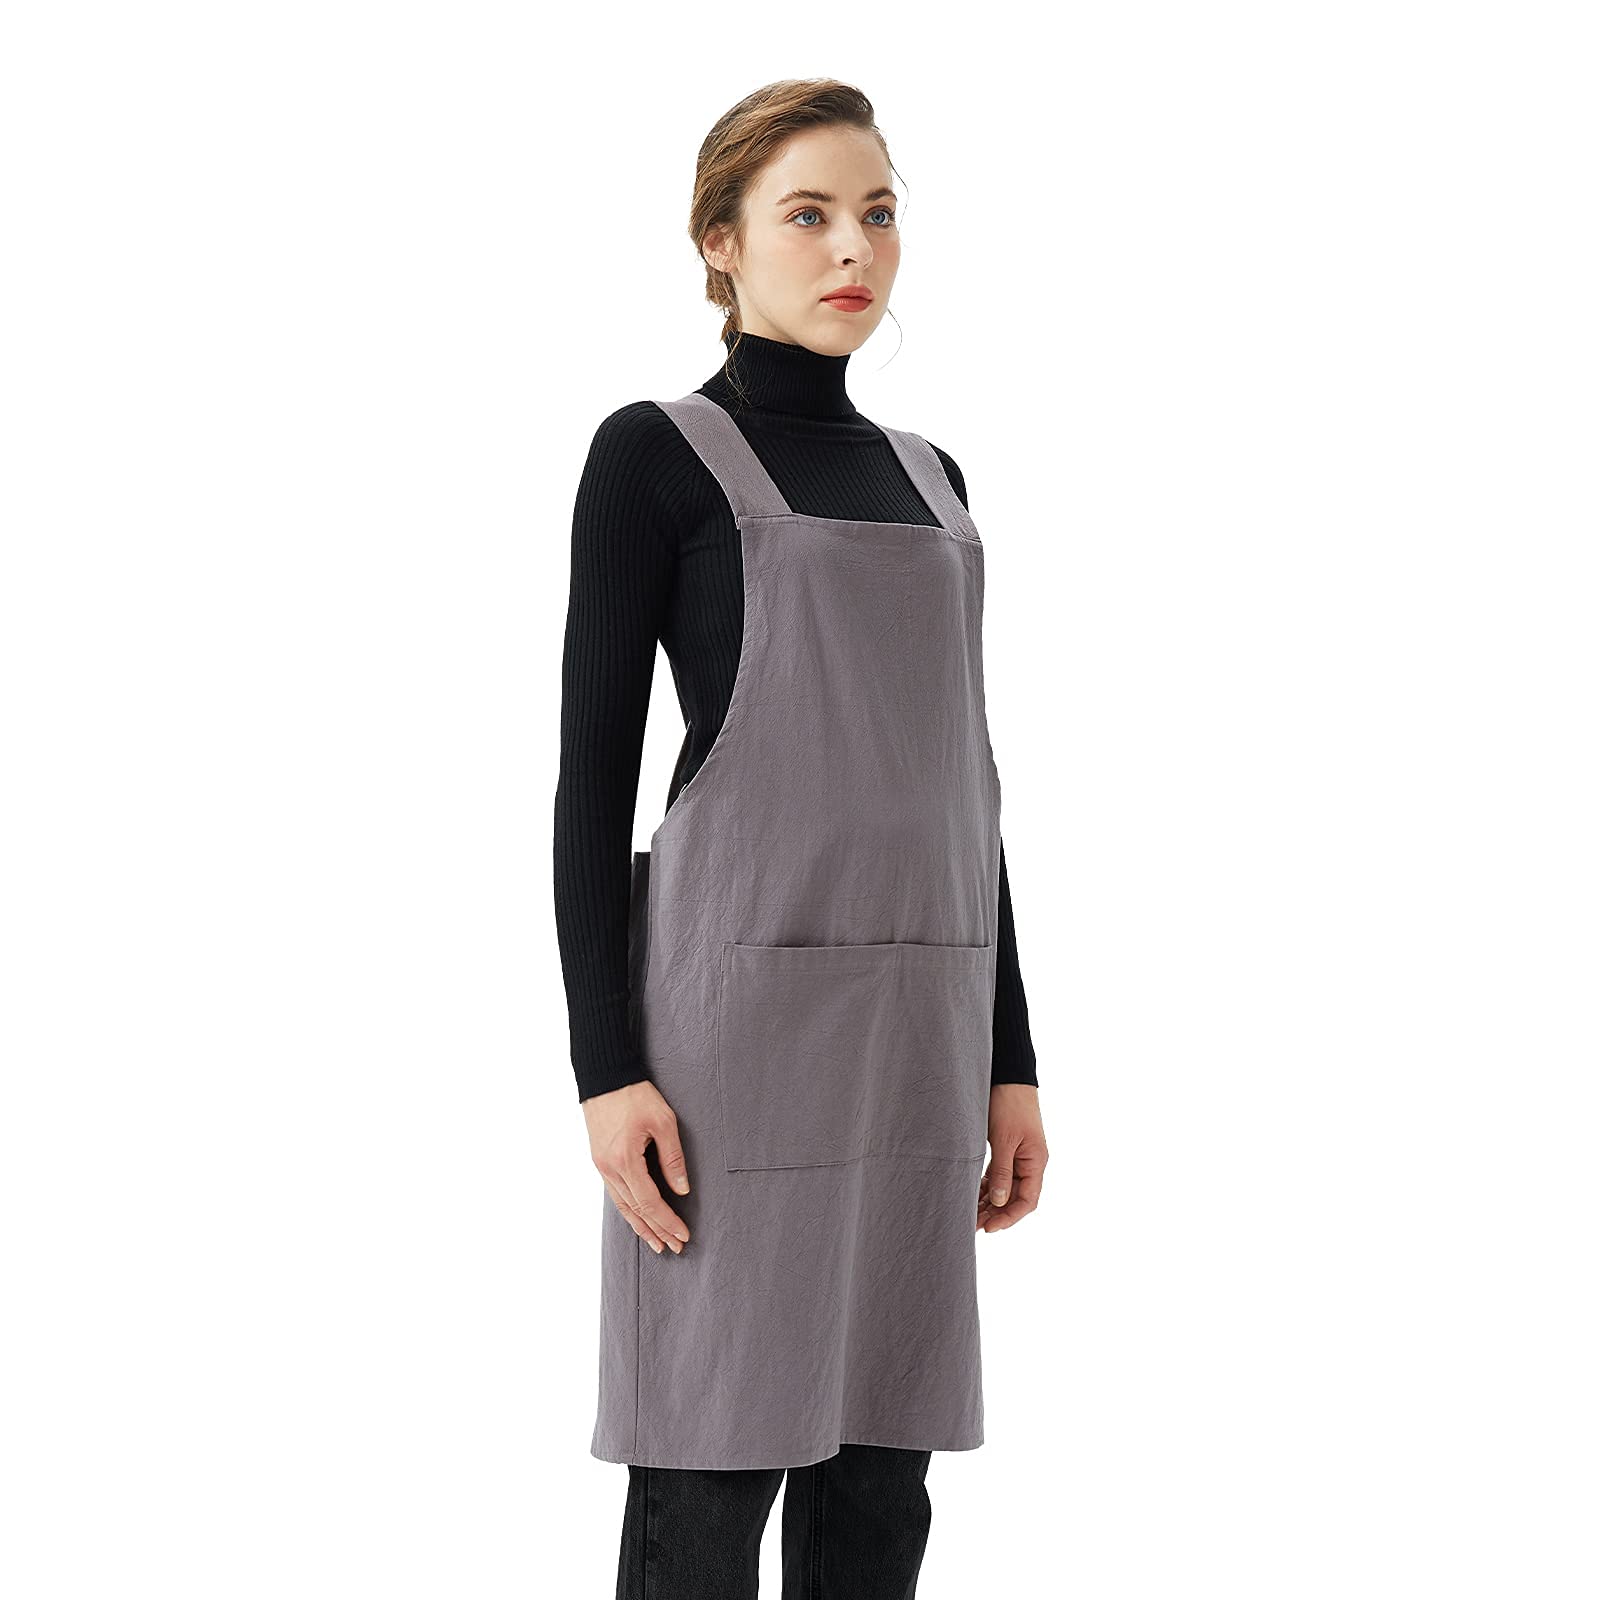 Surblue Cotton Linen Cross Back Aprons Solid Color Unisex Pinafore Vintage Apron Japanese Style with 2 Pockets for Kitchen Cooking Baking Painting Gardening Cleaning for Women Men, Grey